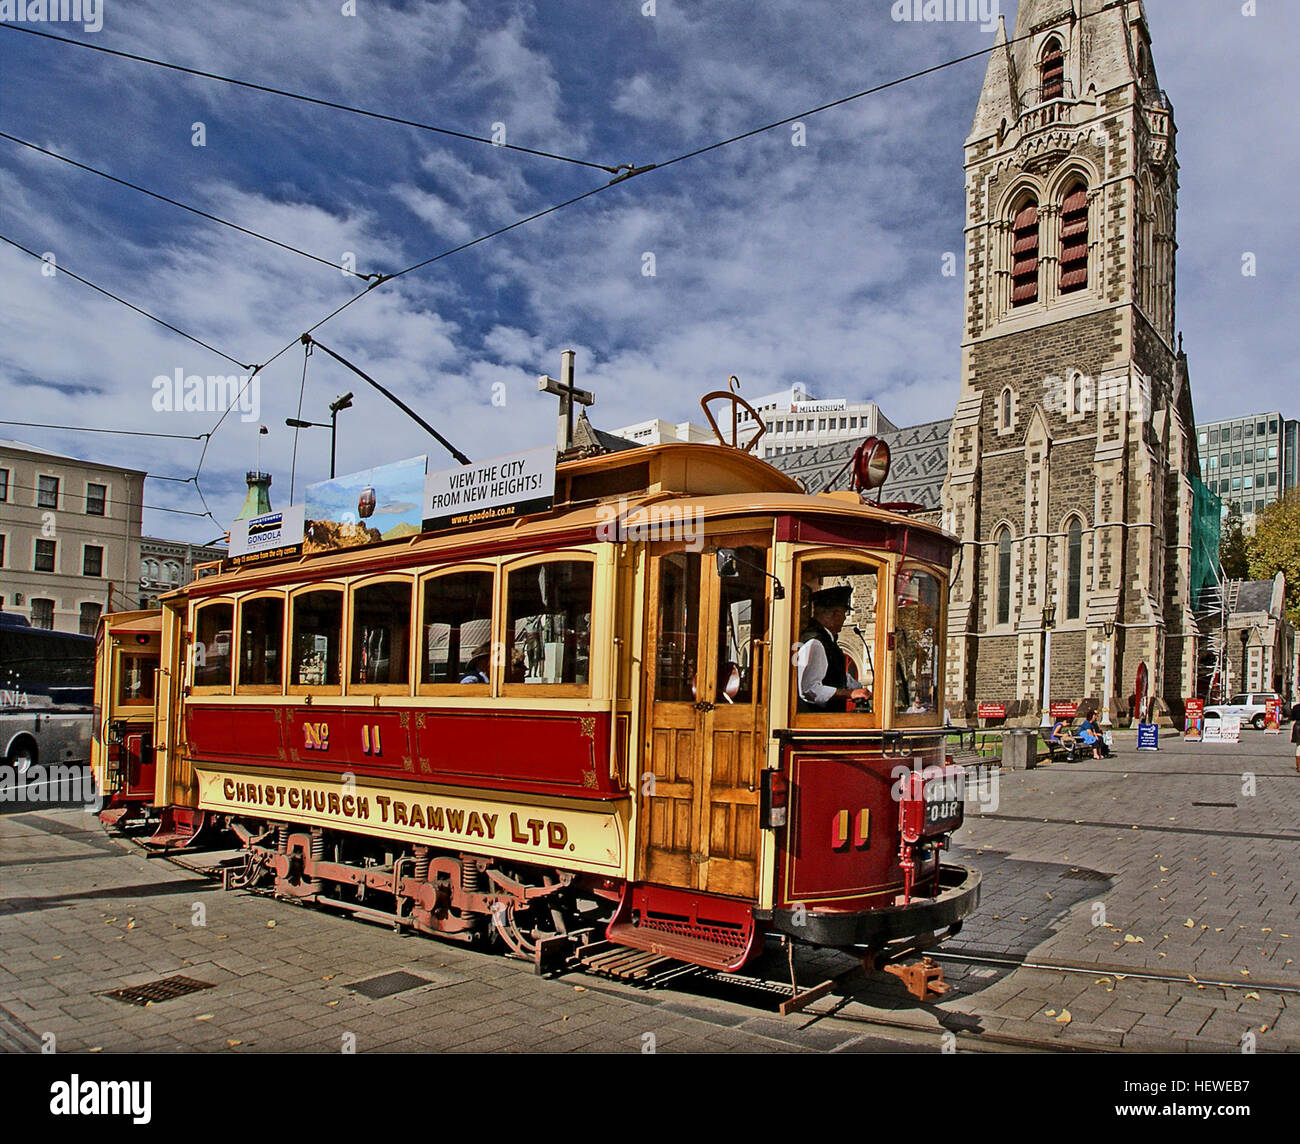 The Christchurch tramway system is an extensive network in Christchurch, New Zealand, with steam and horse trams from 1882. Electric trams ran from 1905 to 1954, when the last line to Papanui was replaced by buses in back in 1954. A few lines were reopened in the city in 1995. The track is standard gauge, 1,435 mm (4 ft 8 1⁄2 in).  There is now a 2.5-kilometre (1.6 mi) central city loop heritage tram system, opened in February 1995 and running all year round, as well as a 1.4-kilometre (0.87 mi) extension opened in February 2015  and a tram museum at the Ferrymead Heritage Park with operating  Stock Photo